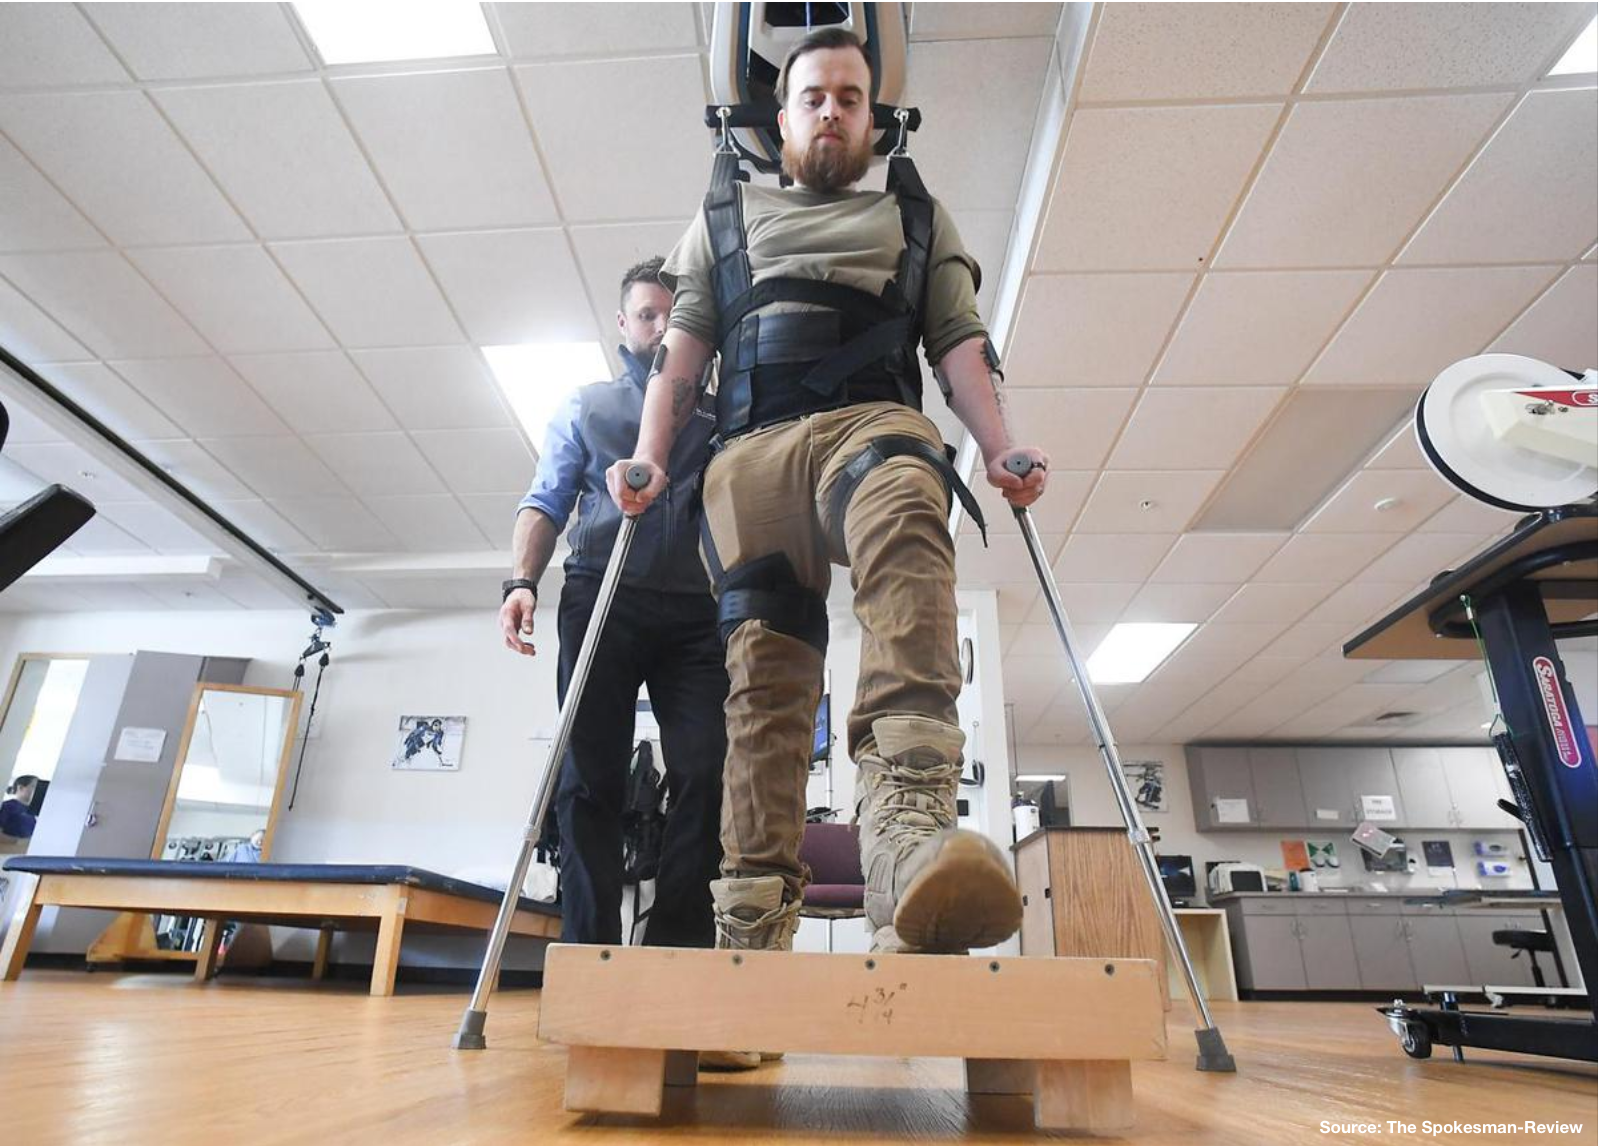 No more ‘fear of falling’: ZeroG Gait and Balance System assists with people walking again